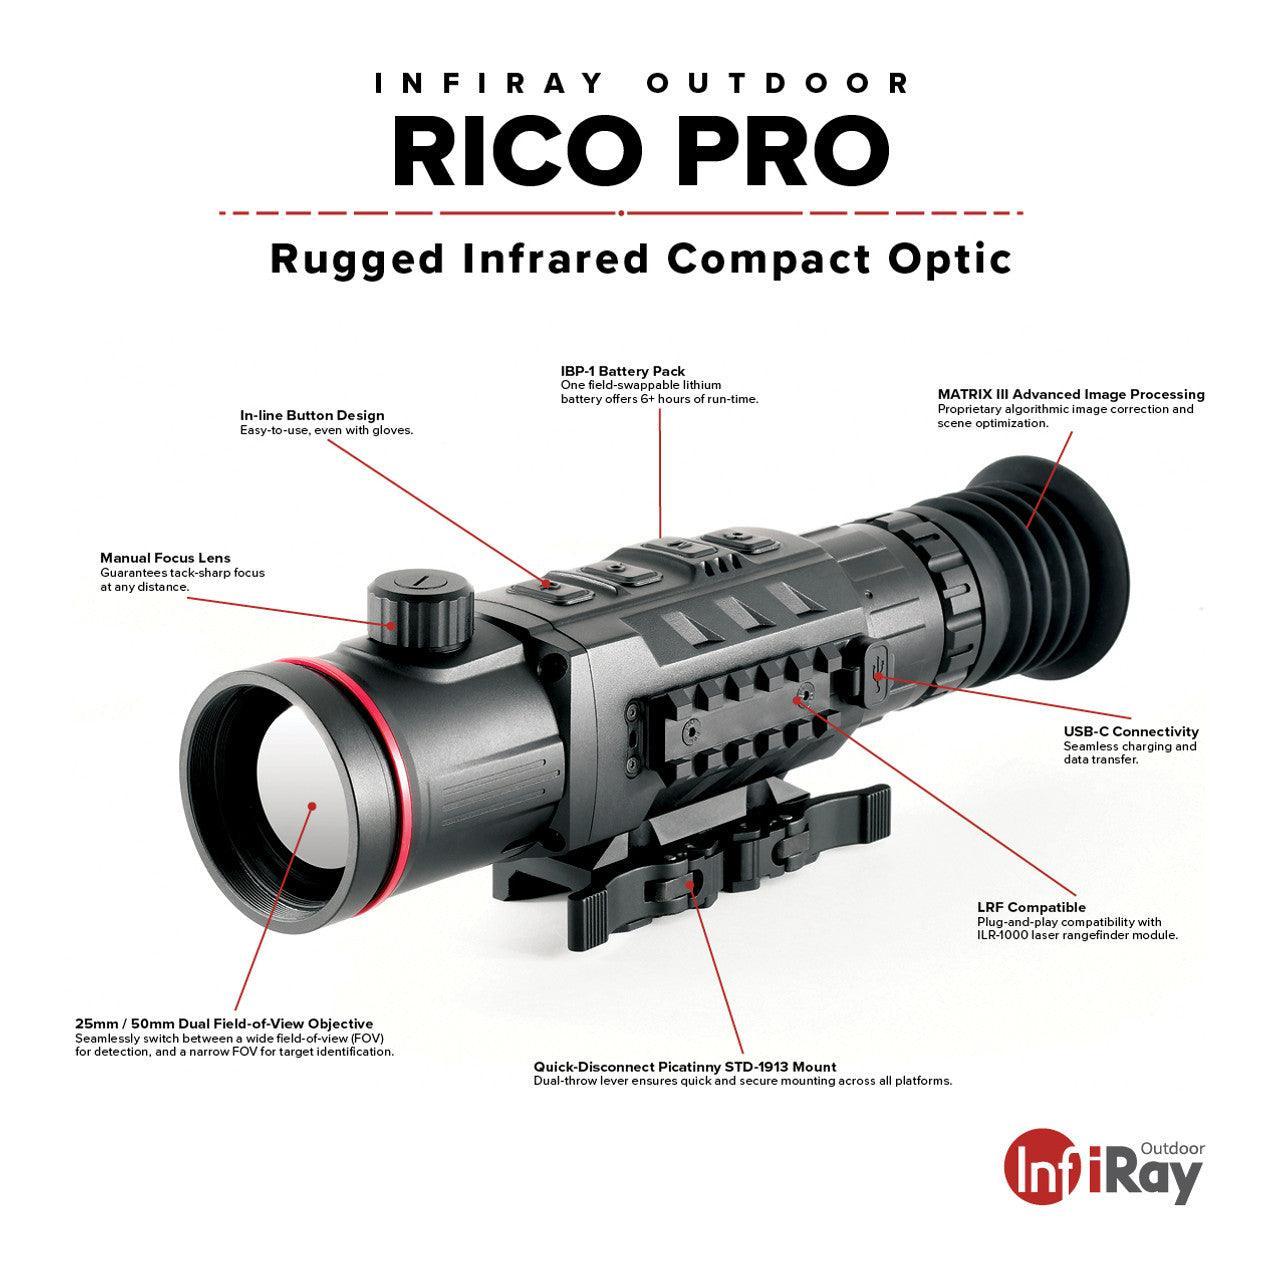 InfiRay Outdoor RICO PRO 640 Variable 25/50mm Thermal Scope 🔥SALE🔥 - NVU